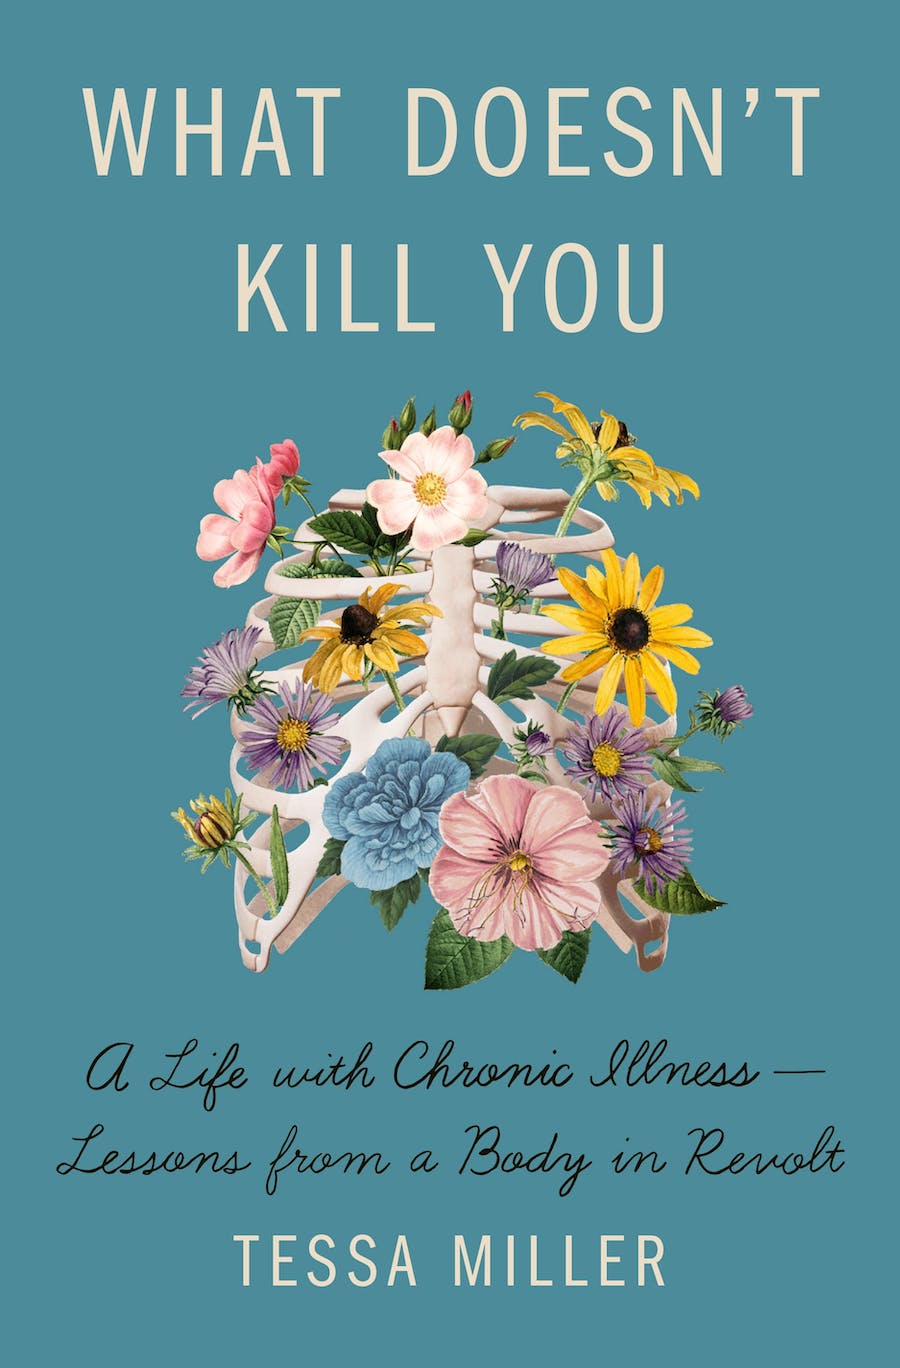 What doesn't kill you is written in off-white against a blue background. A ribcage with flowers growing out of it is in the centre. At the bottom, black handwriting reads A life with chronic illness - lessons from a body in revolt.